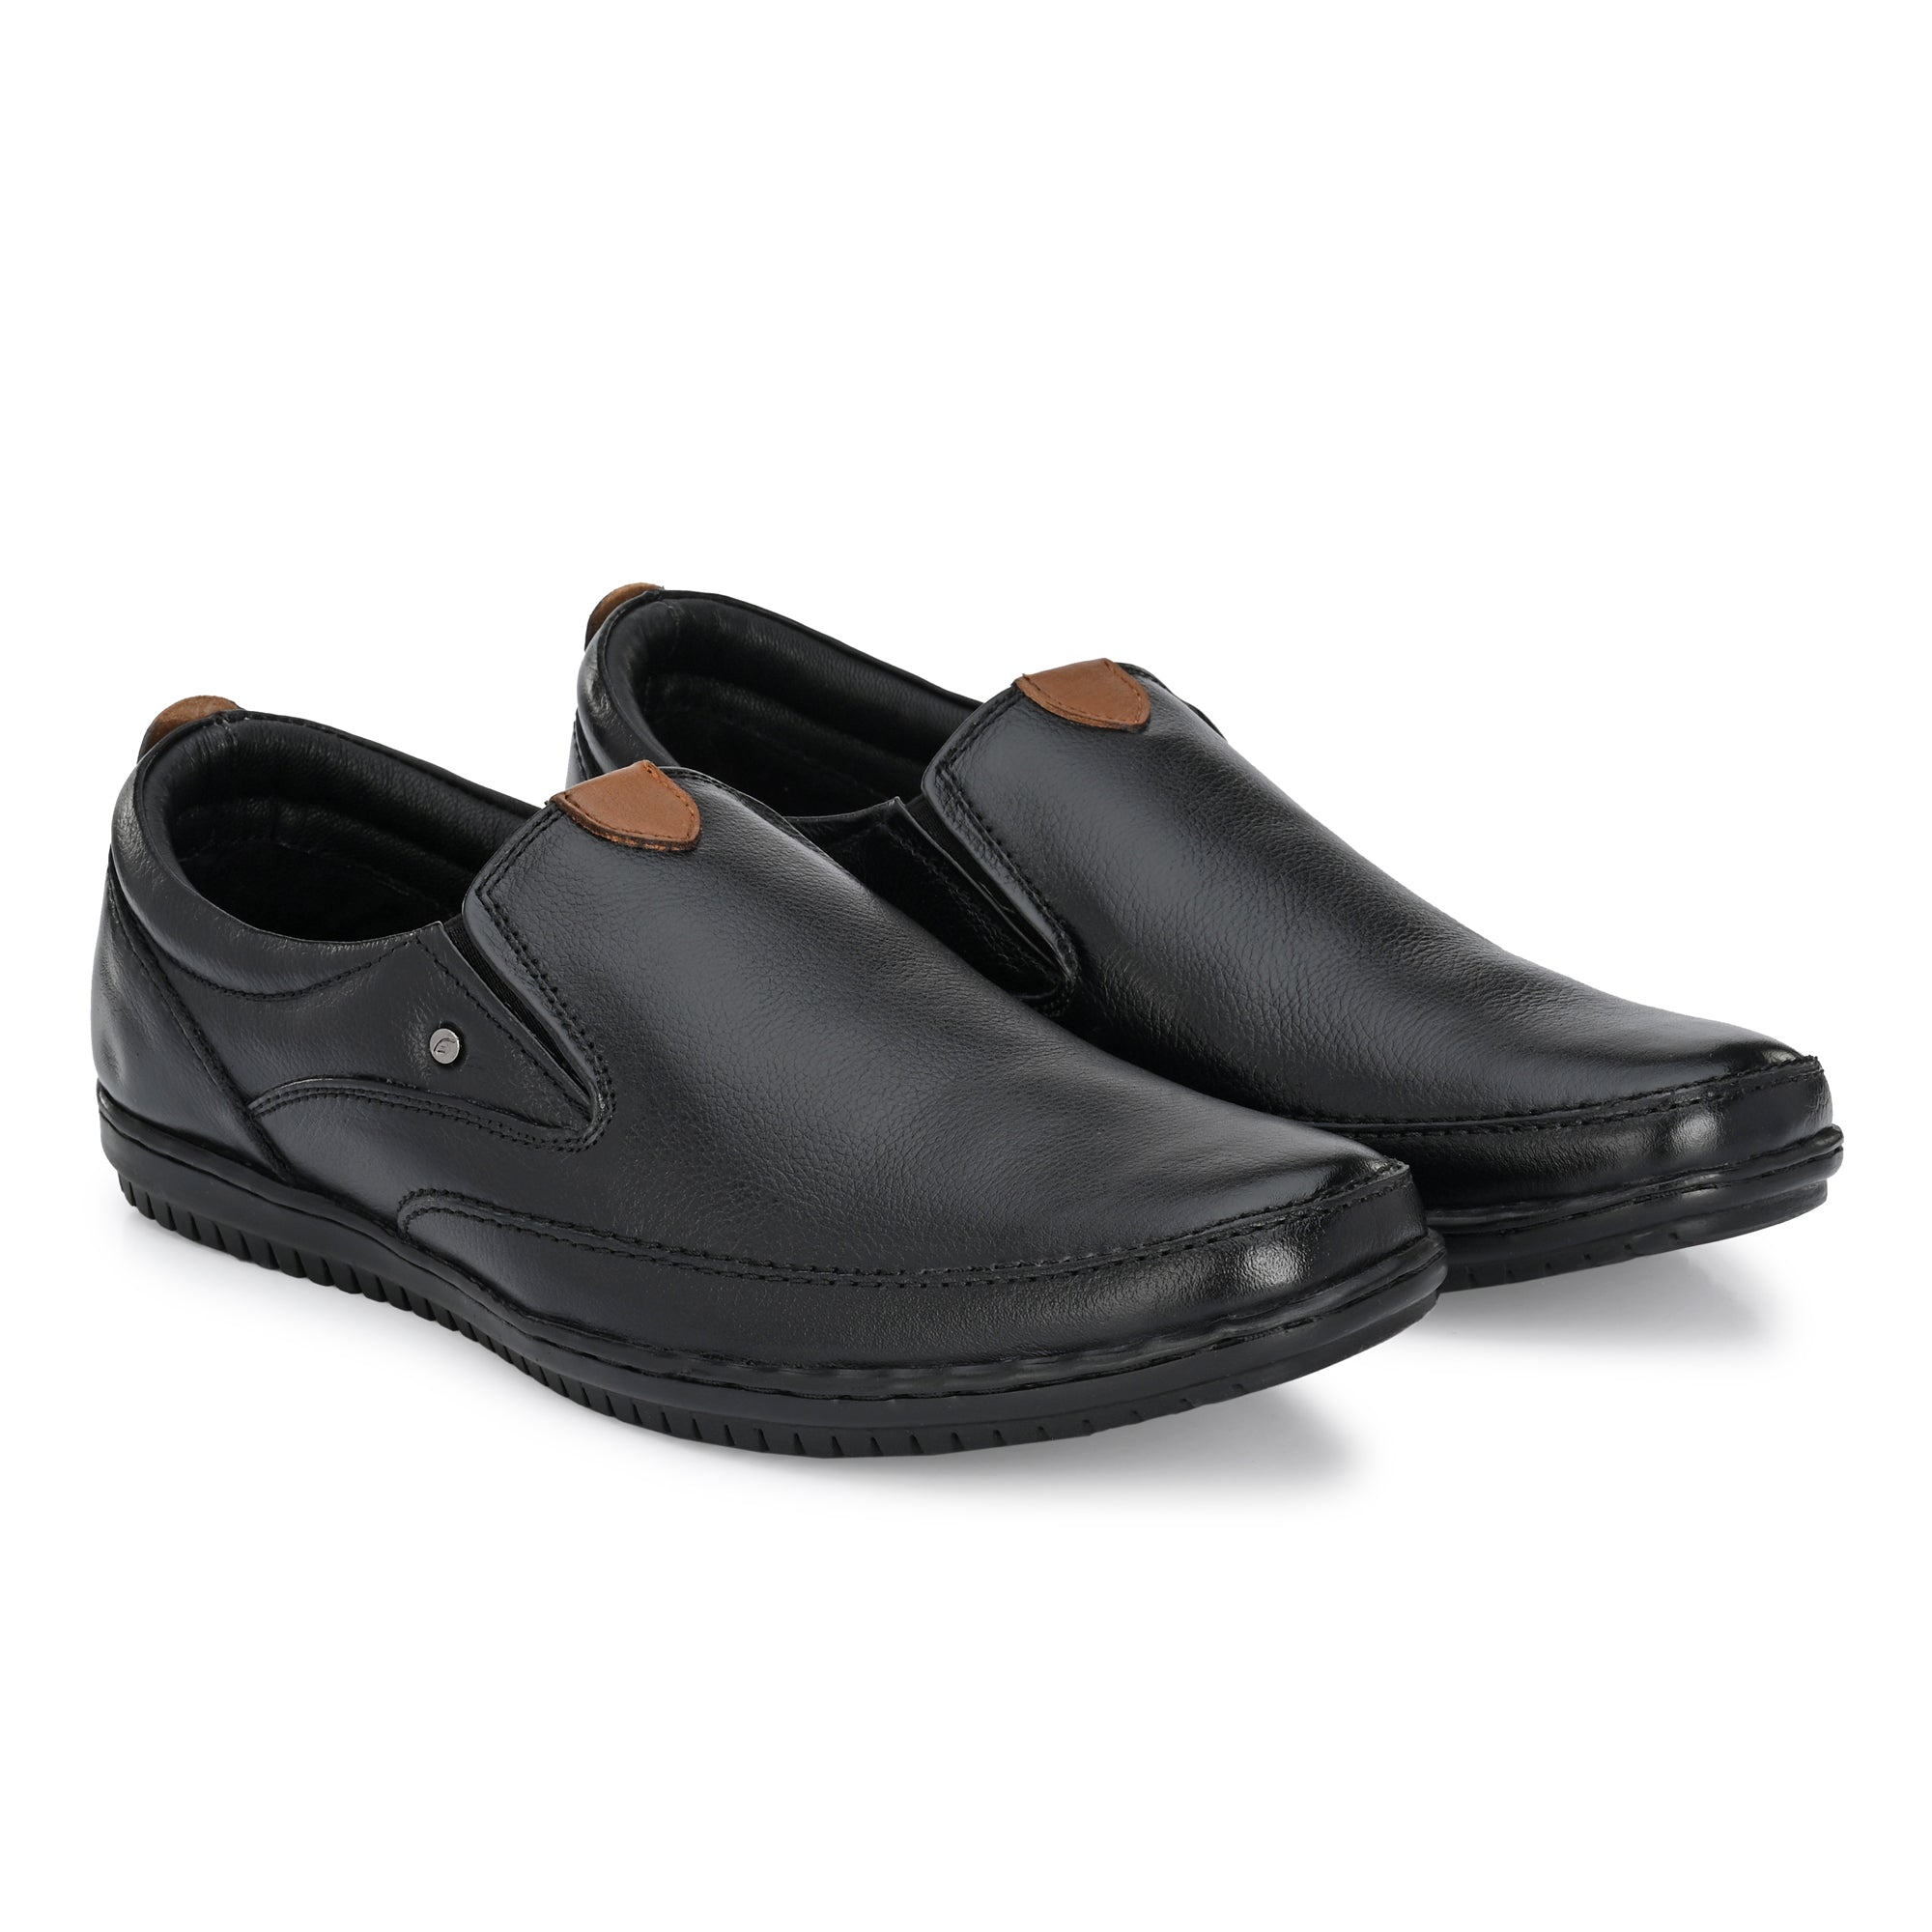 Leather slip on shoes by Egoss